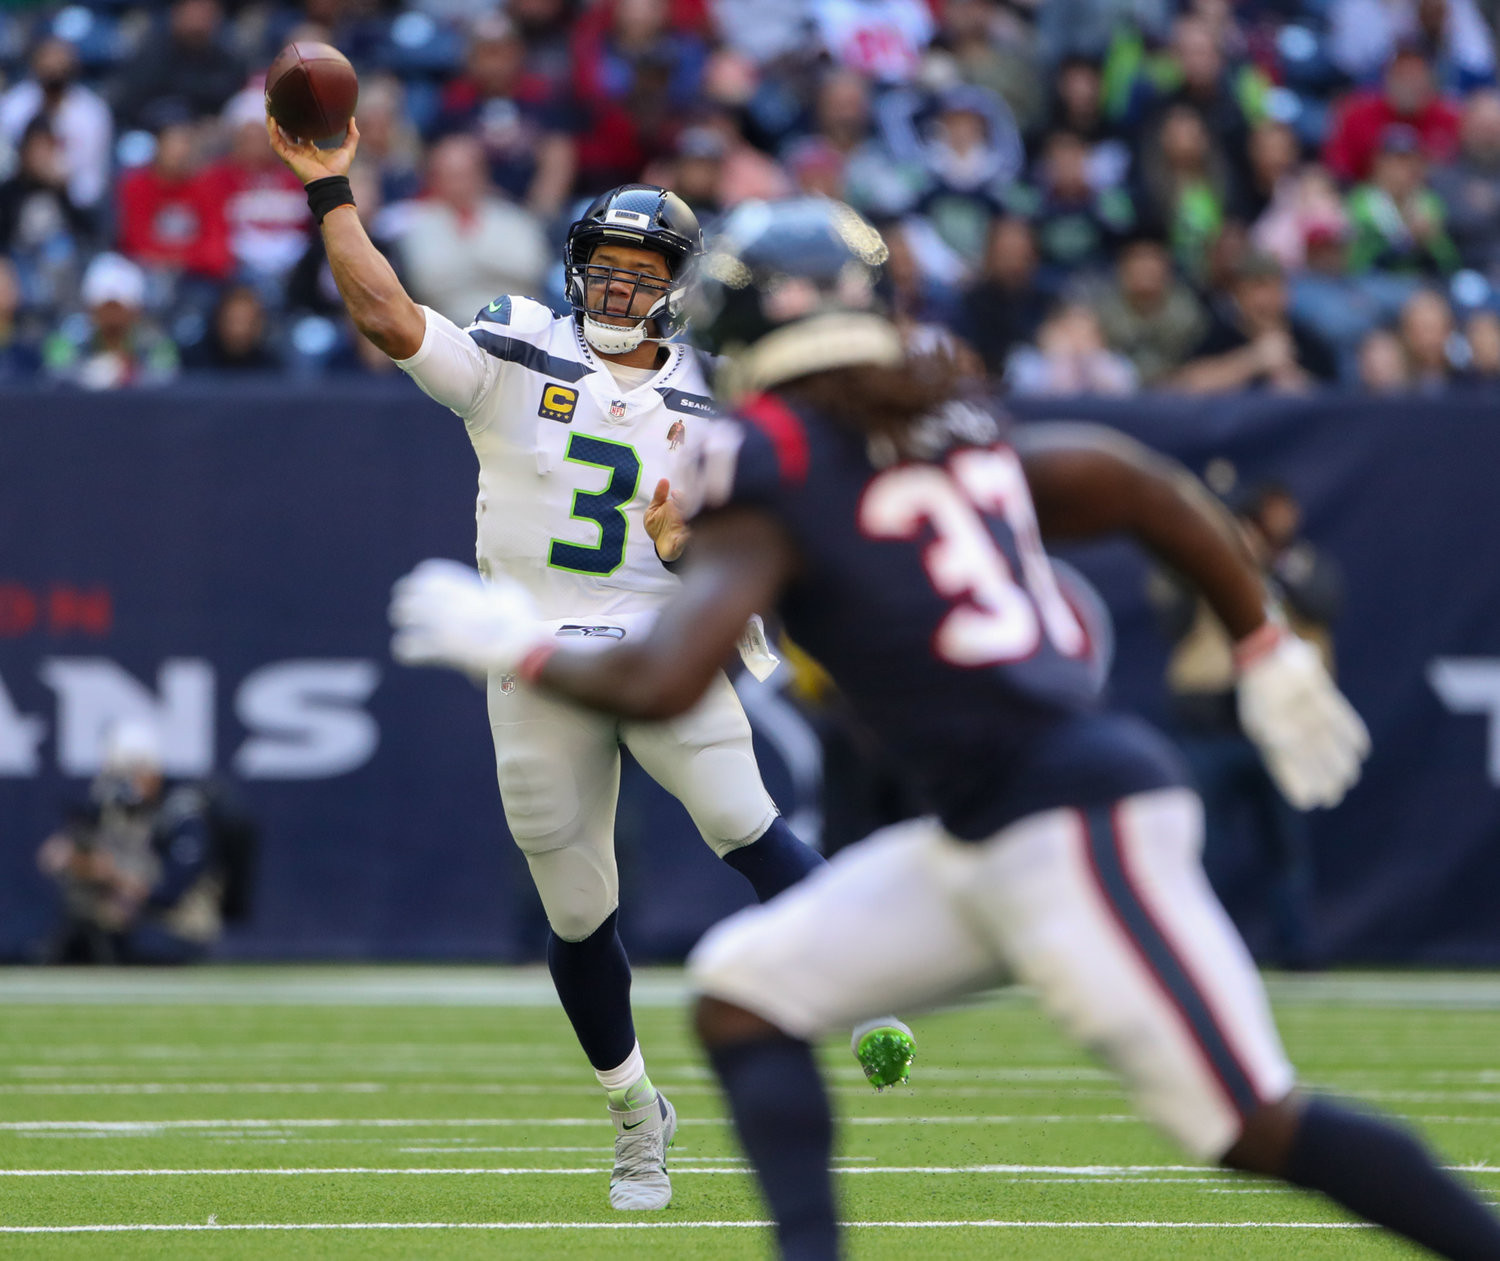 Seattle Seahawks quarterback Russell Wilson (3) passes the ball during the first half of an NFL game between the Seahawks and the Texans on December 12, 2021 in Houston, Texas.